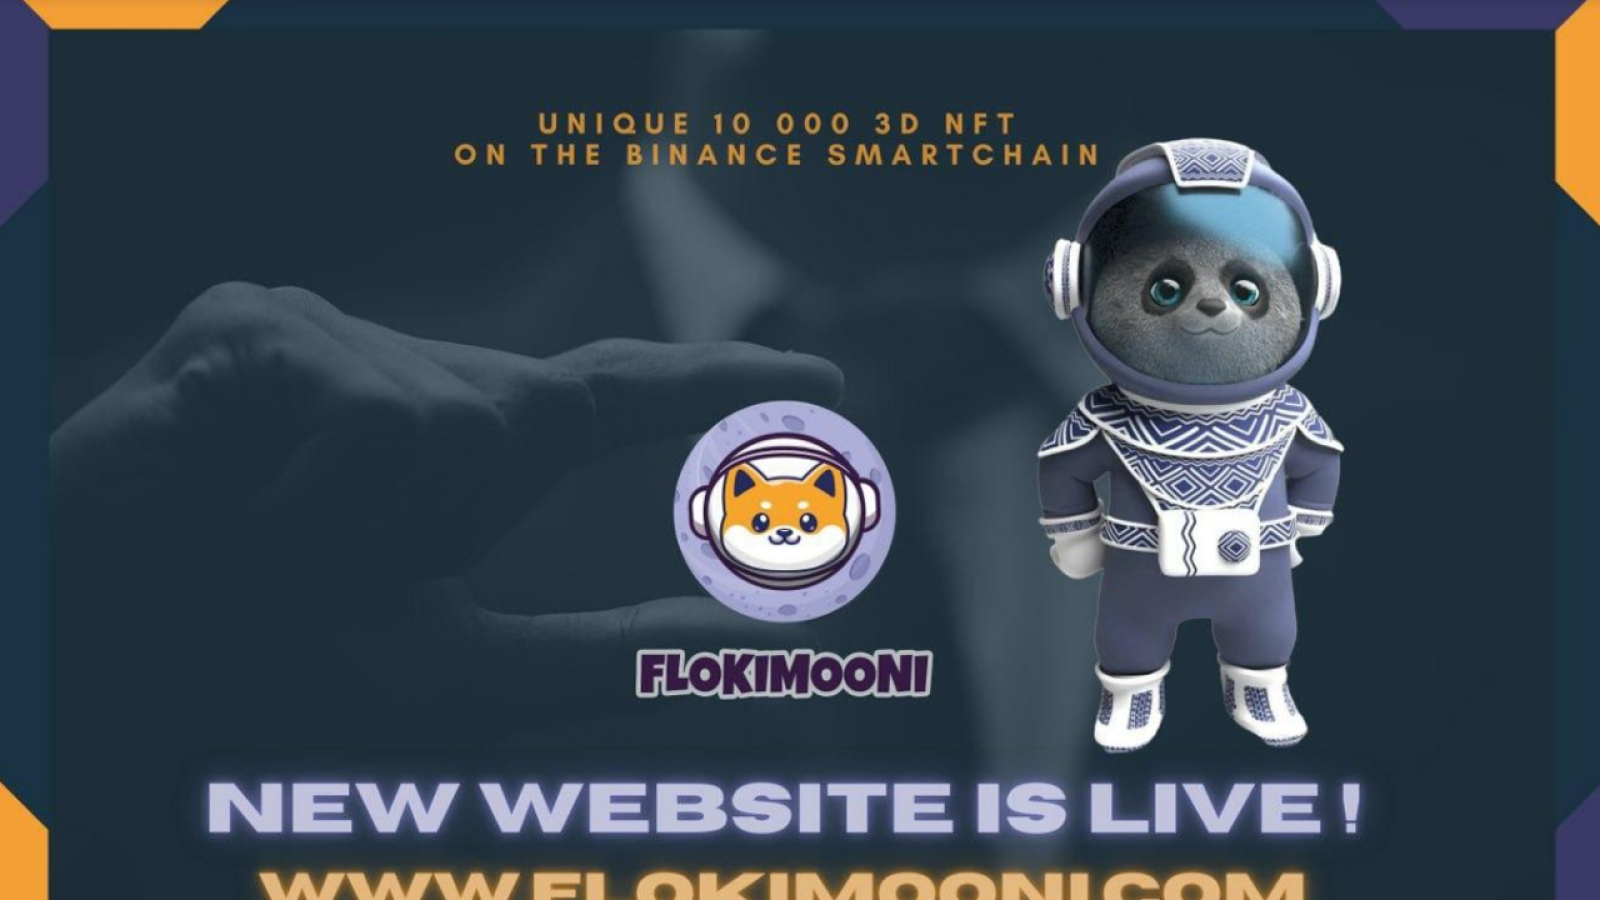 Flokimooni Launching Their New Website While Outperforming the Marketing